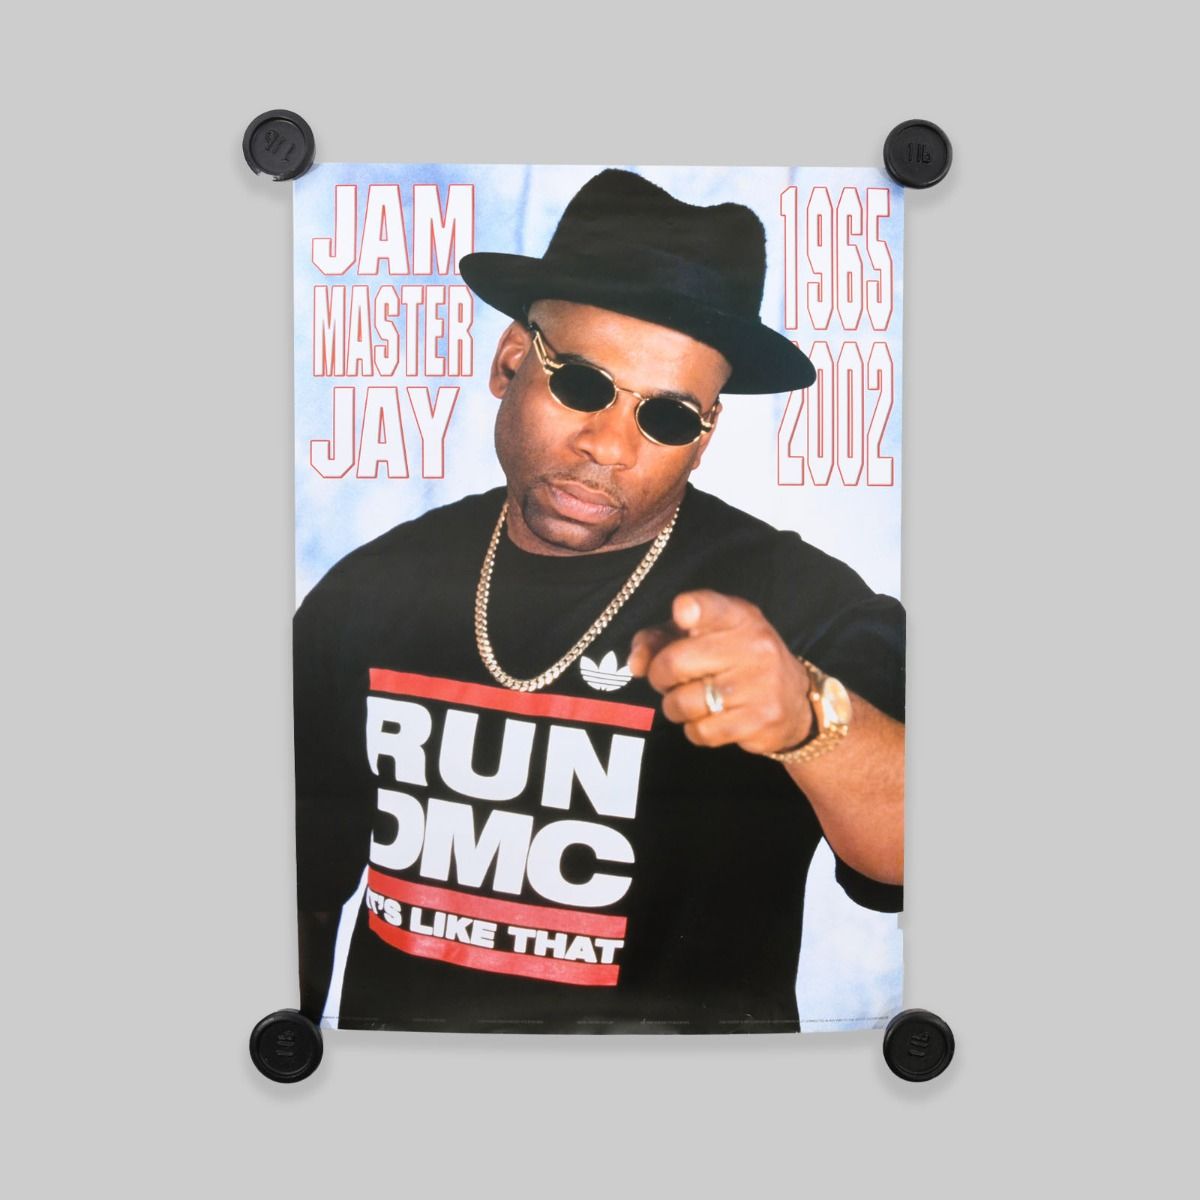 Jam Master Jay Poster A1